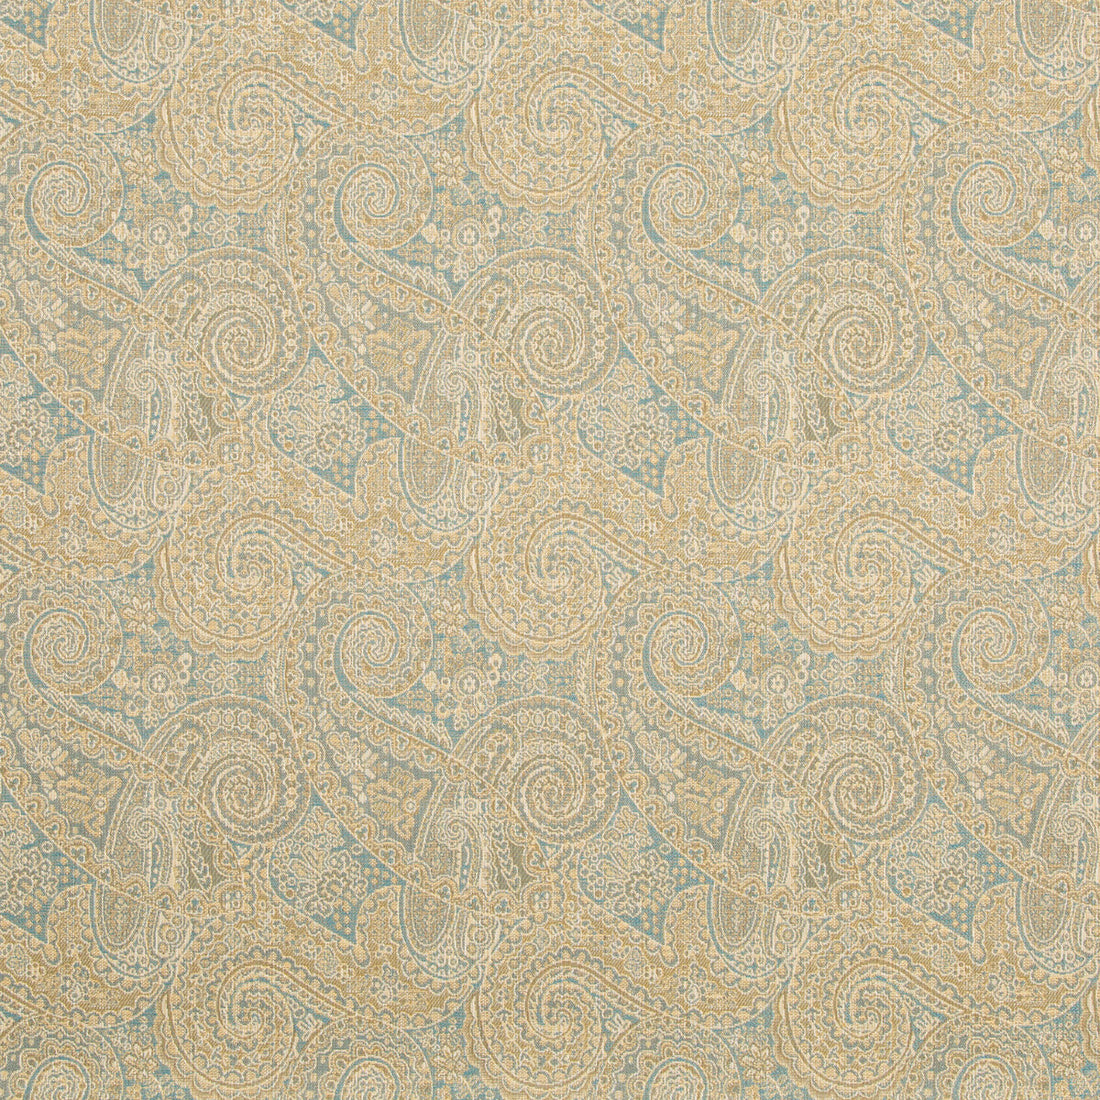 Kasan fabric in adriatic color - pattern 31524.516.0 - by Kravet Contract in the Gis Crypton collection